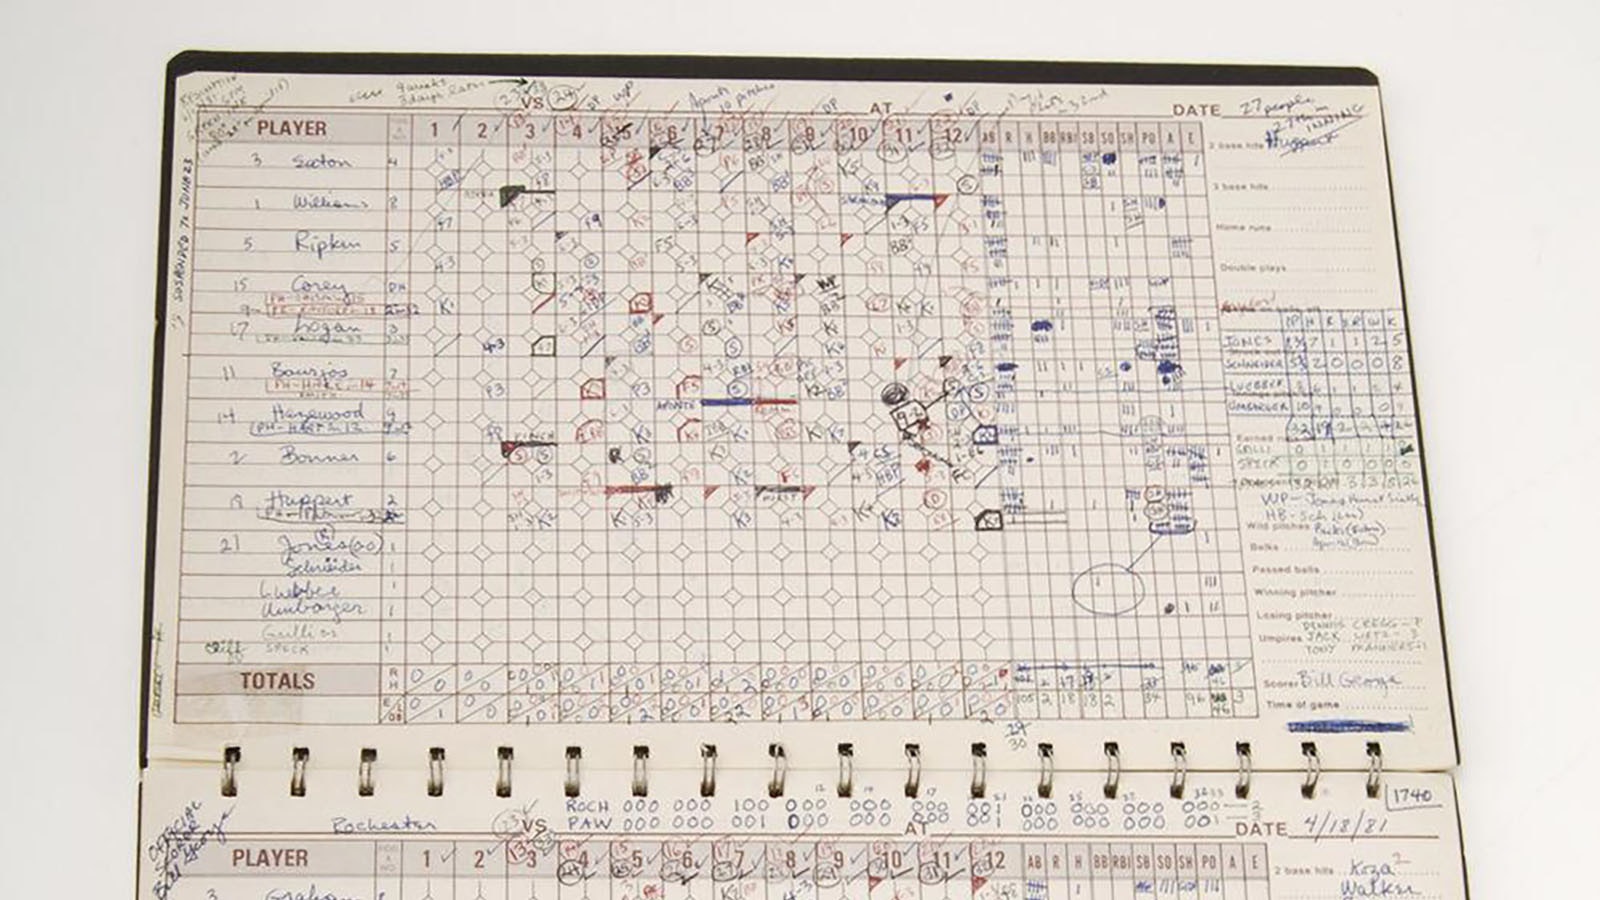 First half of the official scoresheet from the longest game in professional baseball history.